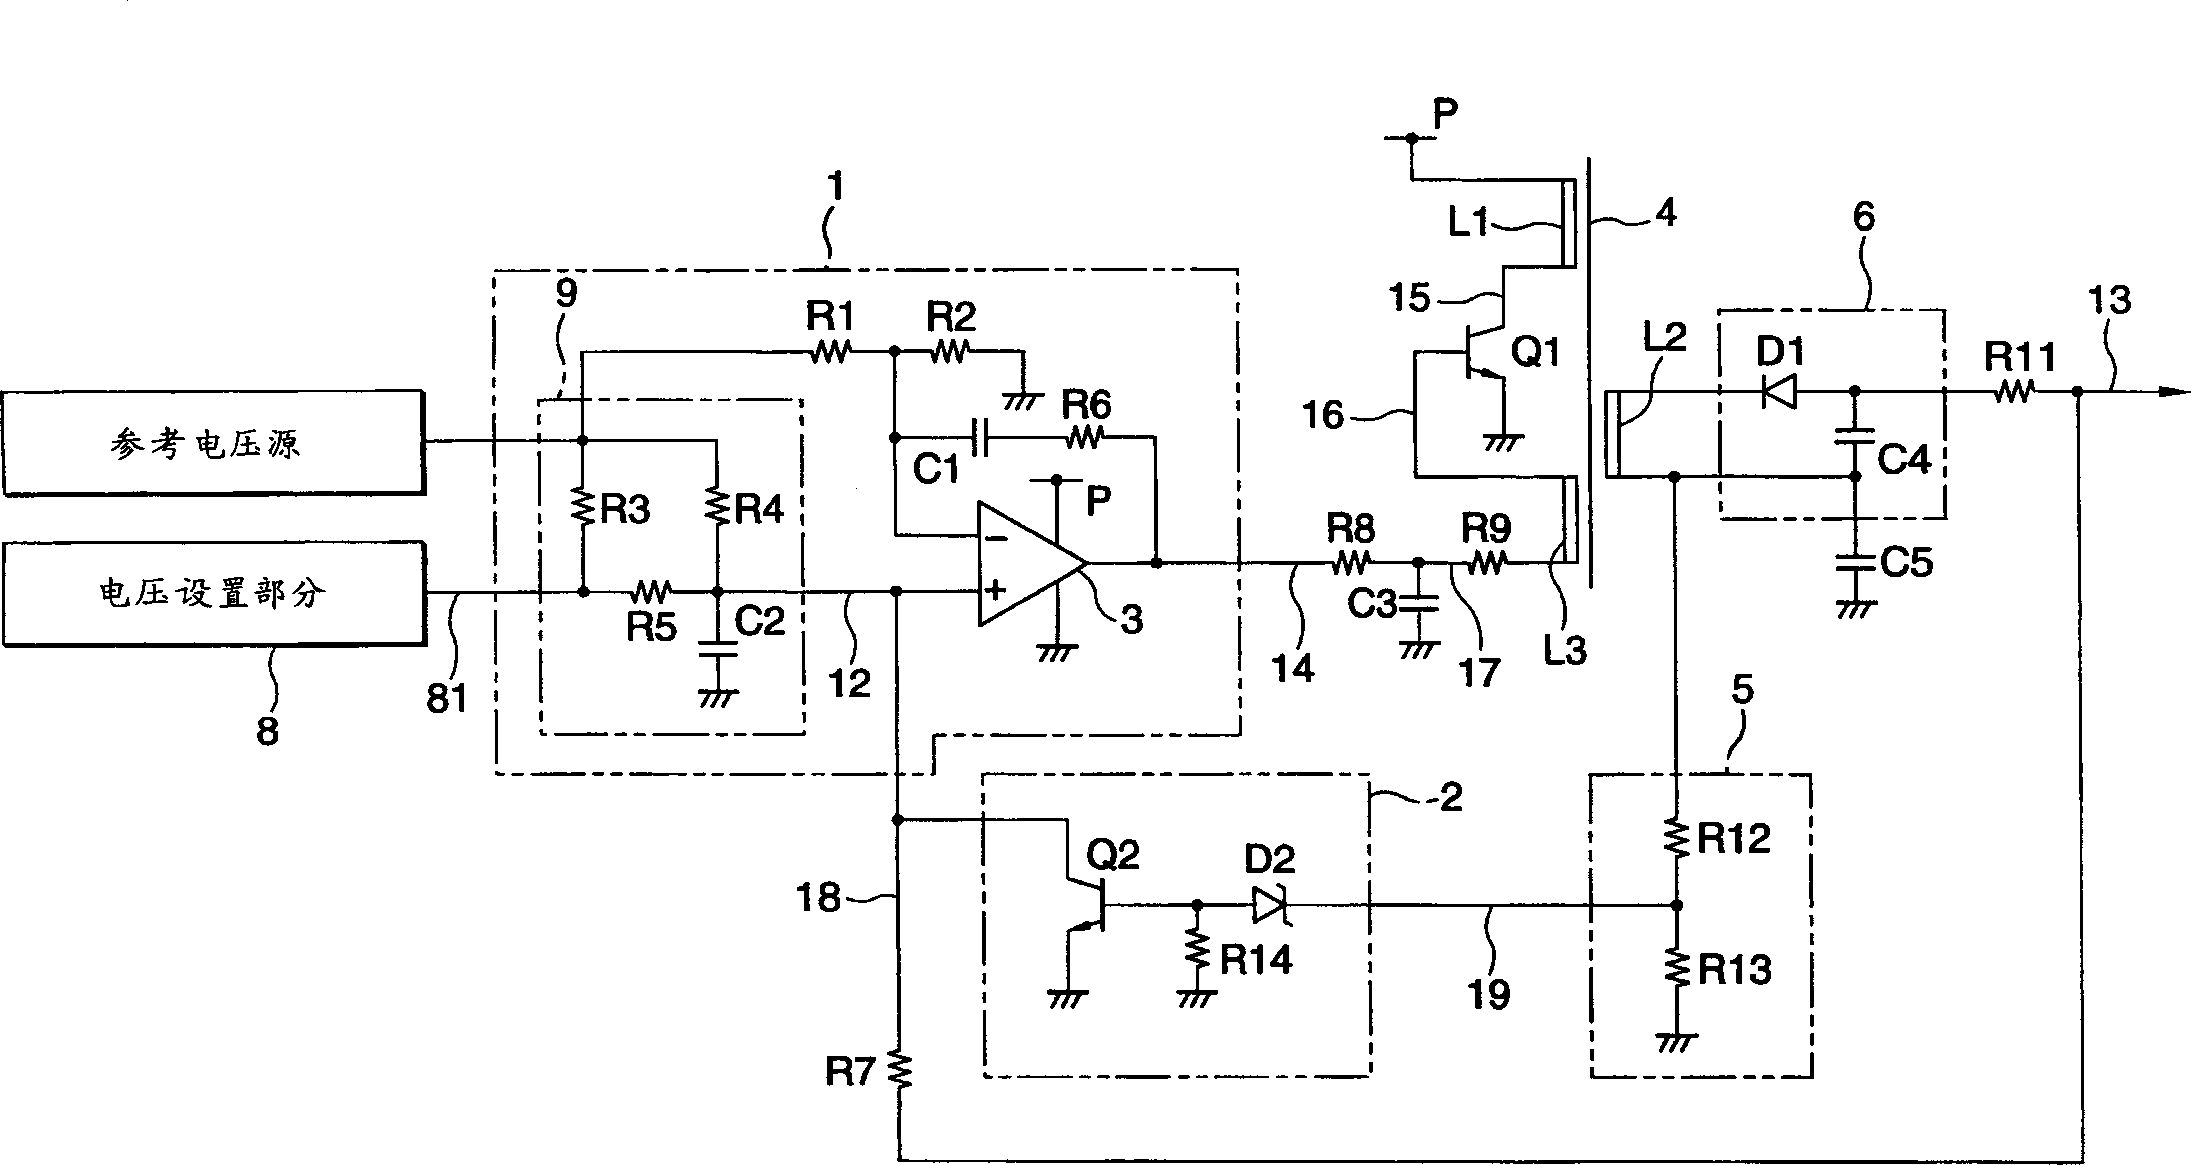 Circuit for producing high voltage used for toner powder system printer